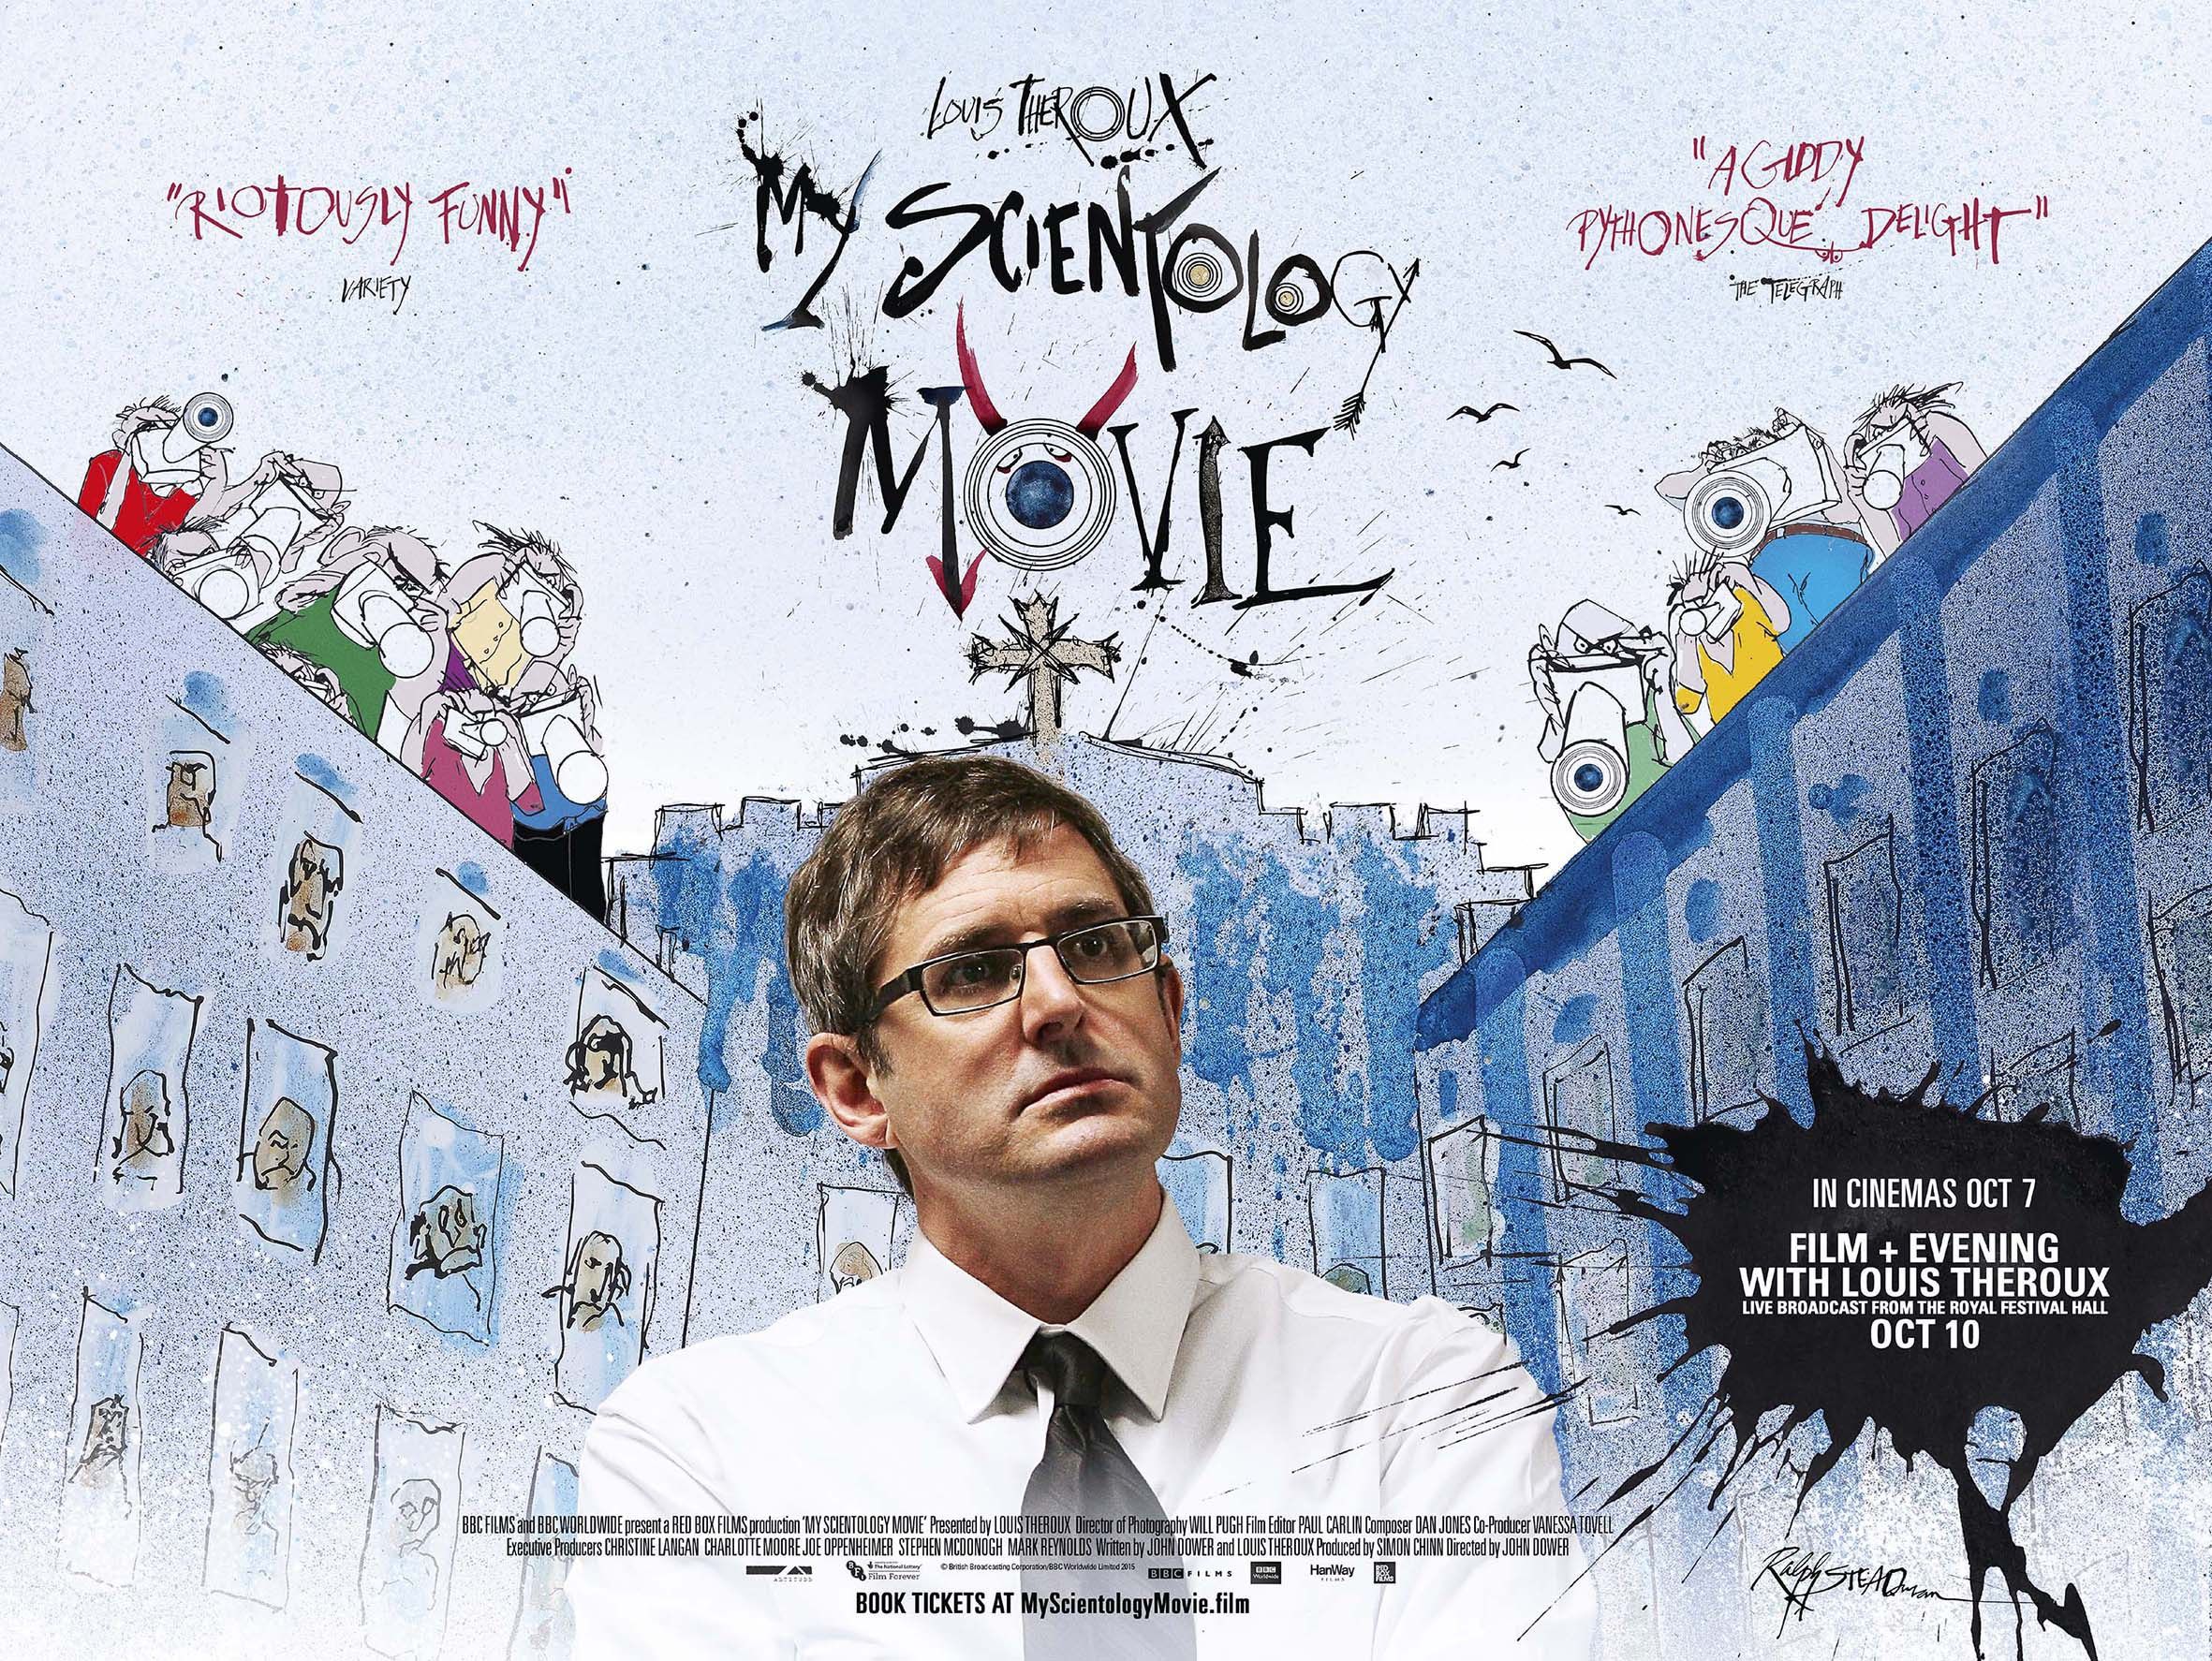 New poster for 'My Scientology Movie'